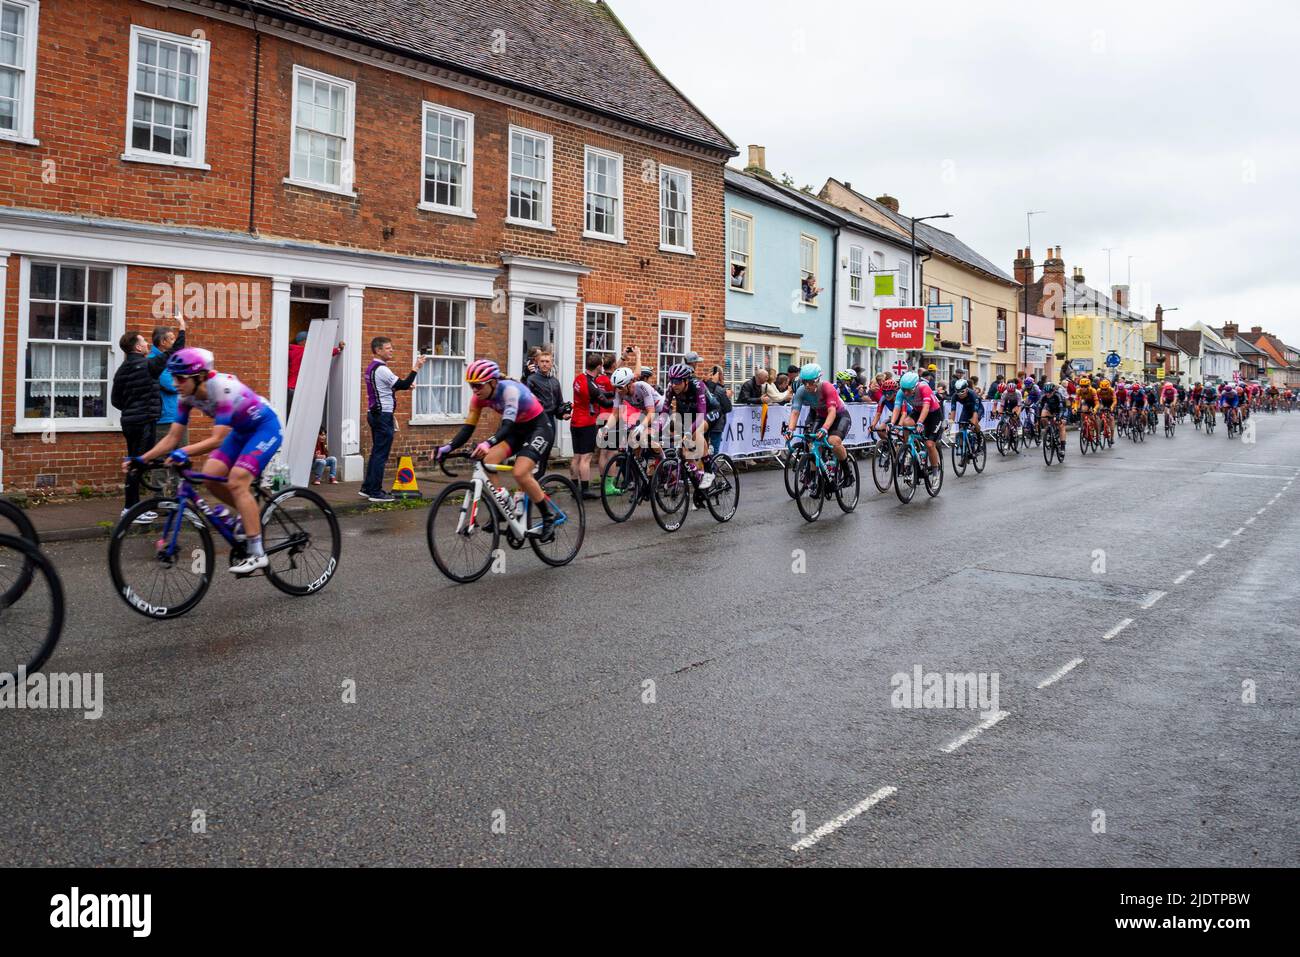 UCI Women's Tour international cycle race passing through the High Street of the market town of Hadleigh in Suffolk, UK. Stock Photo